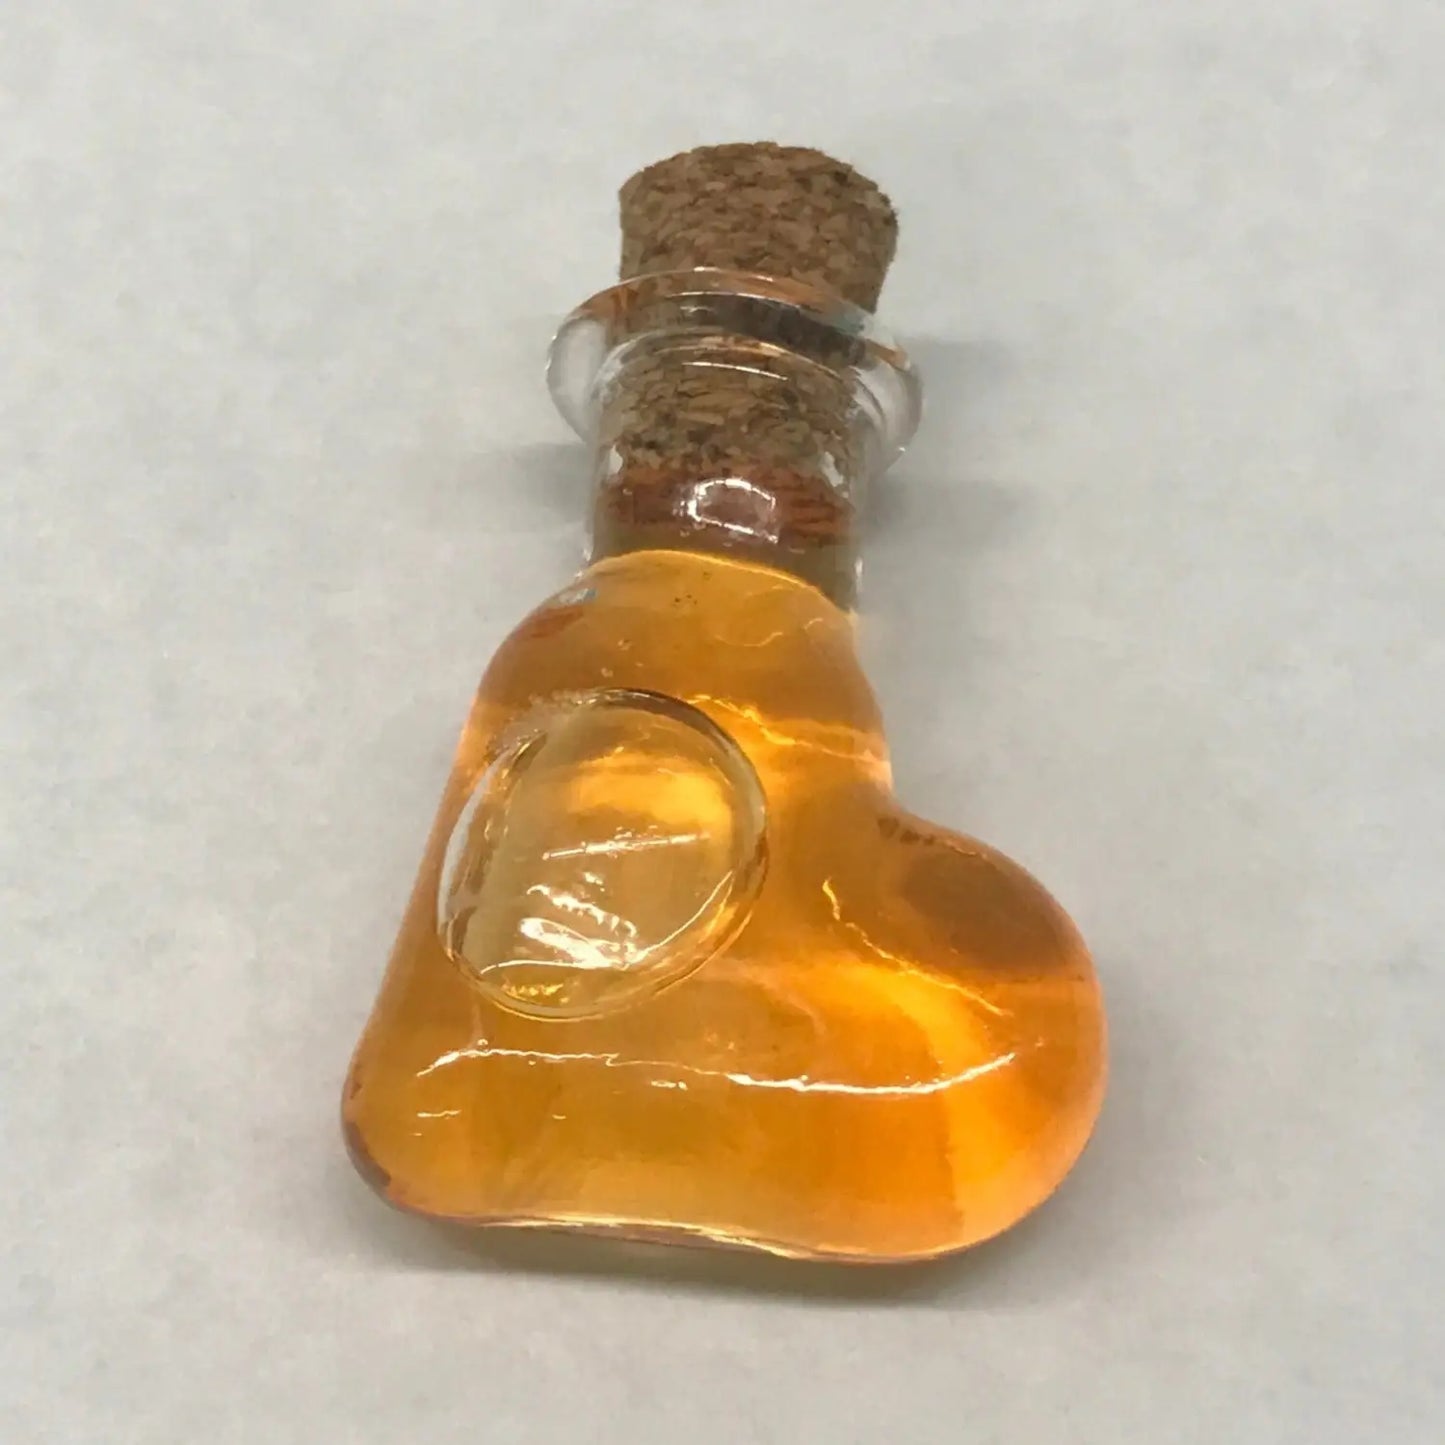 Tabletop Gaming Decorative Potions - Orange / Heart 2 - DnD